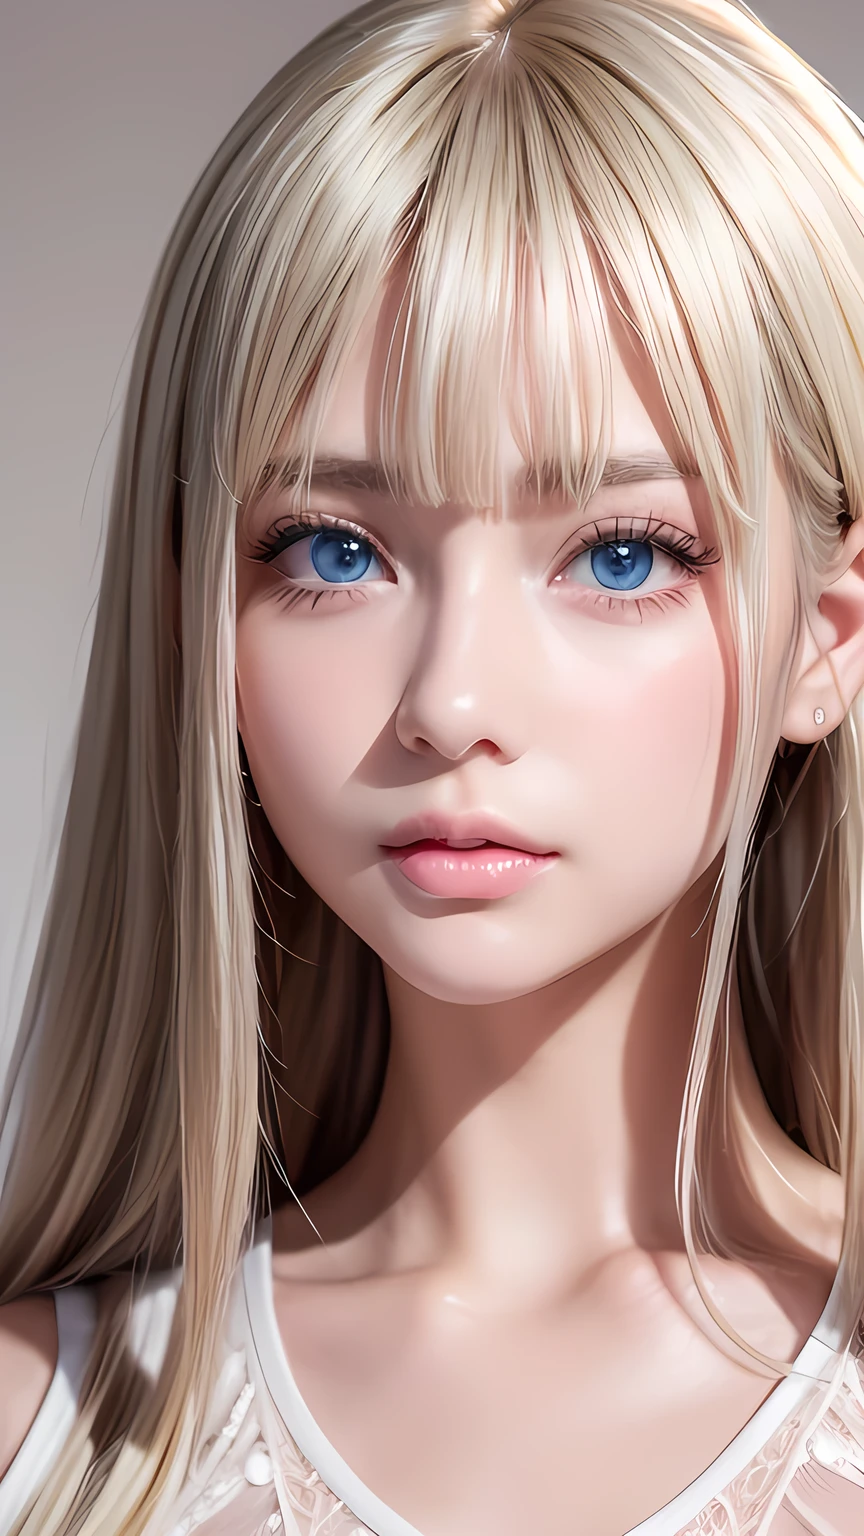 Dressed、(Photorealistic:1.4)、(ハイパーRealistic:1.4)、(Realistic:1.3)、(Smooth lighting:1.05)、(Improved cinematic lighting quality:0.9)、32k、1 Girl、Very cute expression、A beautiful 16 year old blonde girl、bangs that fall on the face、Bangs left over the eyeessy bangs between the eyes and nose、Realistic top lighting、Backlight、Face Light、Super long silky platinum hair、Blonde rays、(Bright light:1.2)、(quality improvement:1.4)、(Highest quality realistic textured skin:1.4)、Very beautiful, detailed, shiny, very bright, mint blue, large eyes、Very big eyes、Detailed face、A careful eye for quality、(Tired, sleepy and satisfied: 0.0)、Face close up、T-Shirts、(Enhances the body line:1.1)、(Enhances the beauty of skin texture:1.1)、Cheek gloss highlighter、Small Face Beauty、Round face